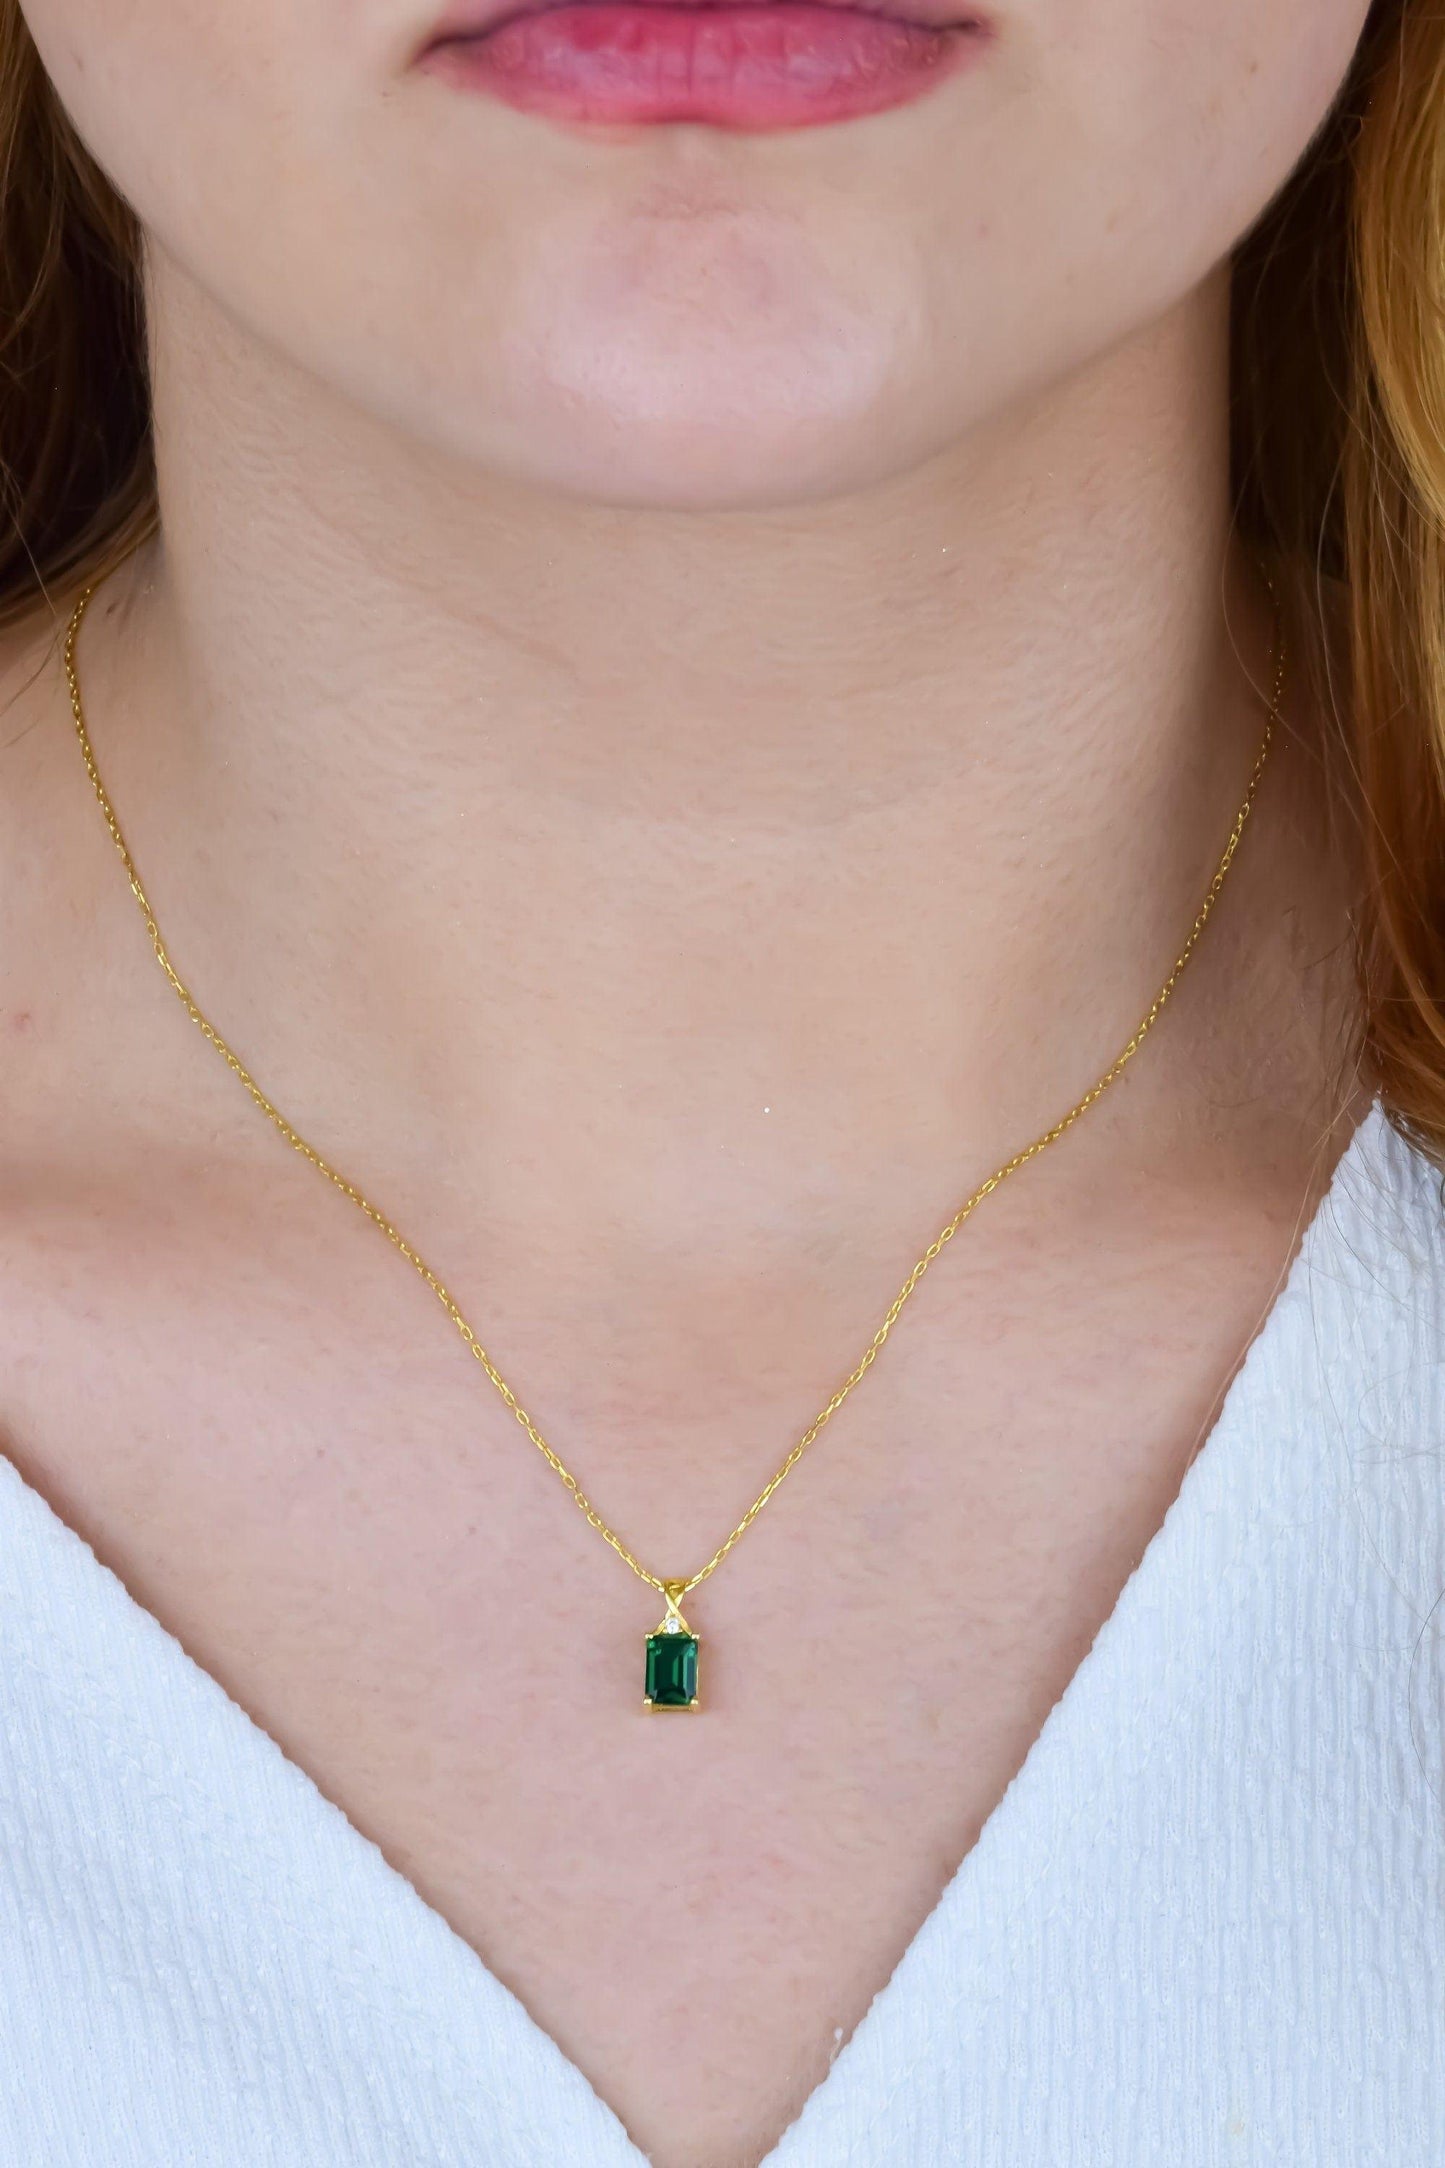 14K Gold Emerald Cut Solid Necklace Pendant Dainty Emerald Necklace Gift For Her - JBR Jeweler